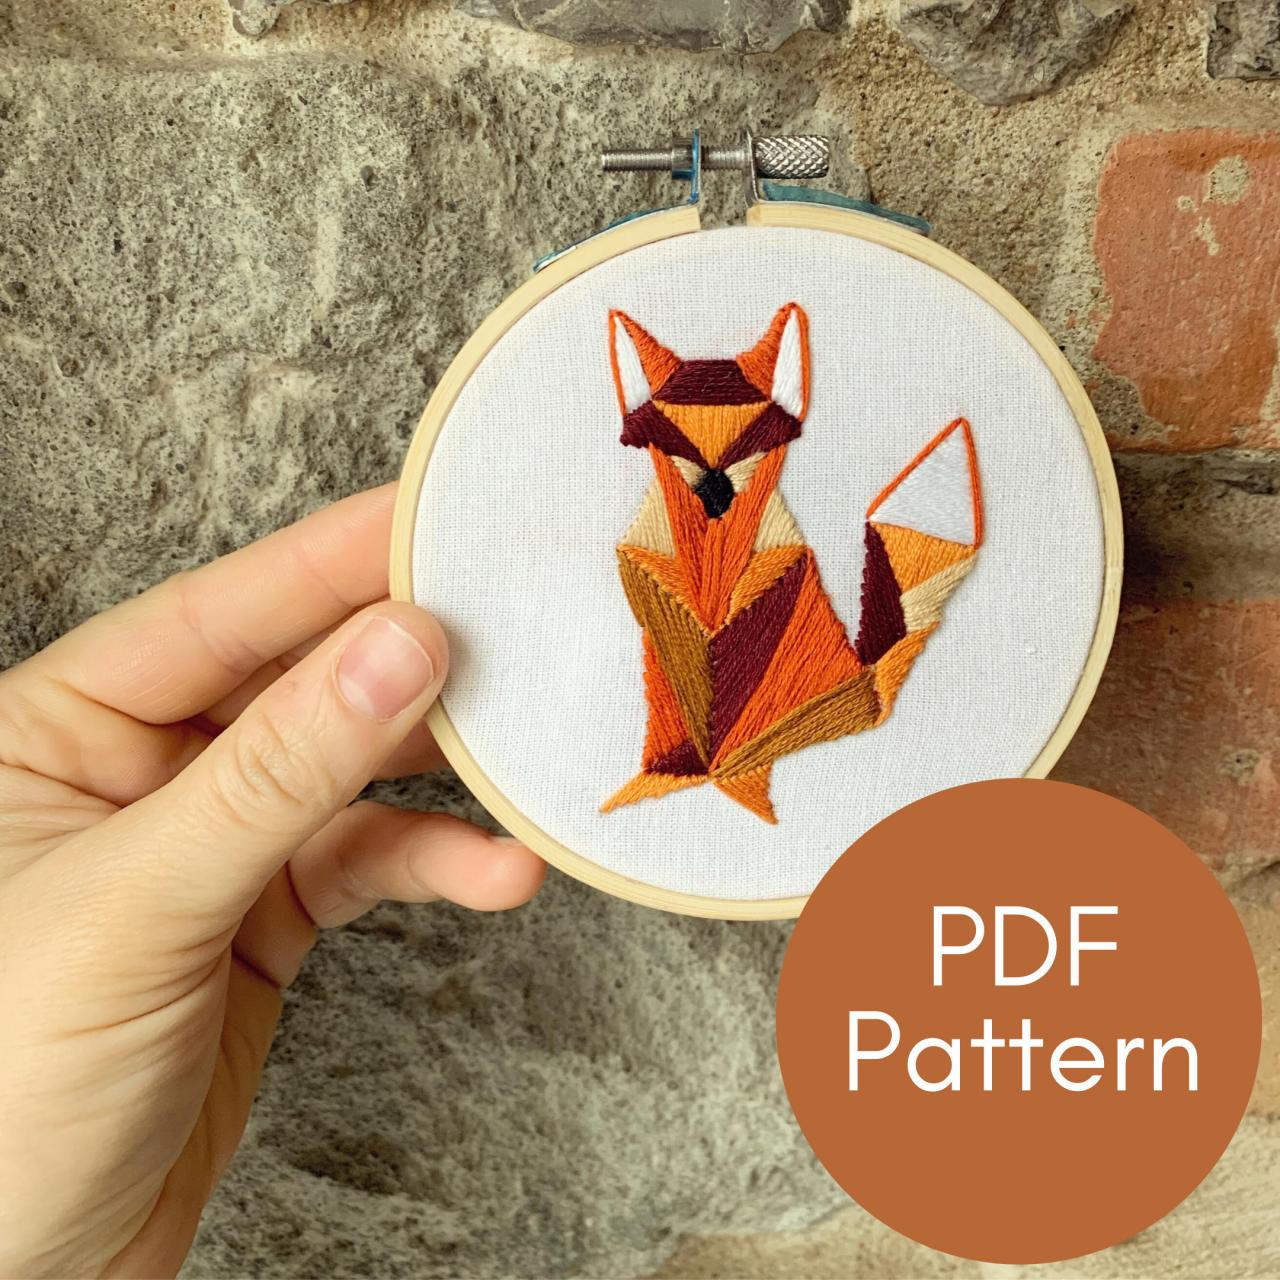 PDF Hand Embroidery Pattern | Beginner Embroidery | Fox Embroidery | Modern Embroidery | Embroidery Pattern Instant Download | DIY | Guide